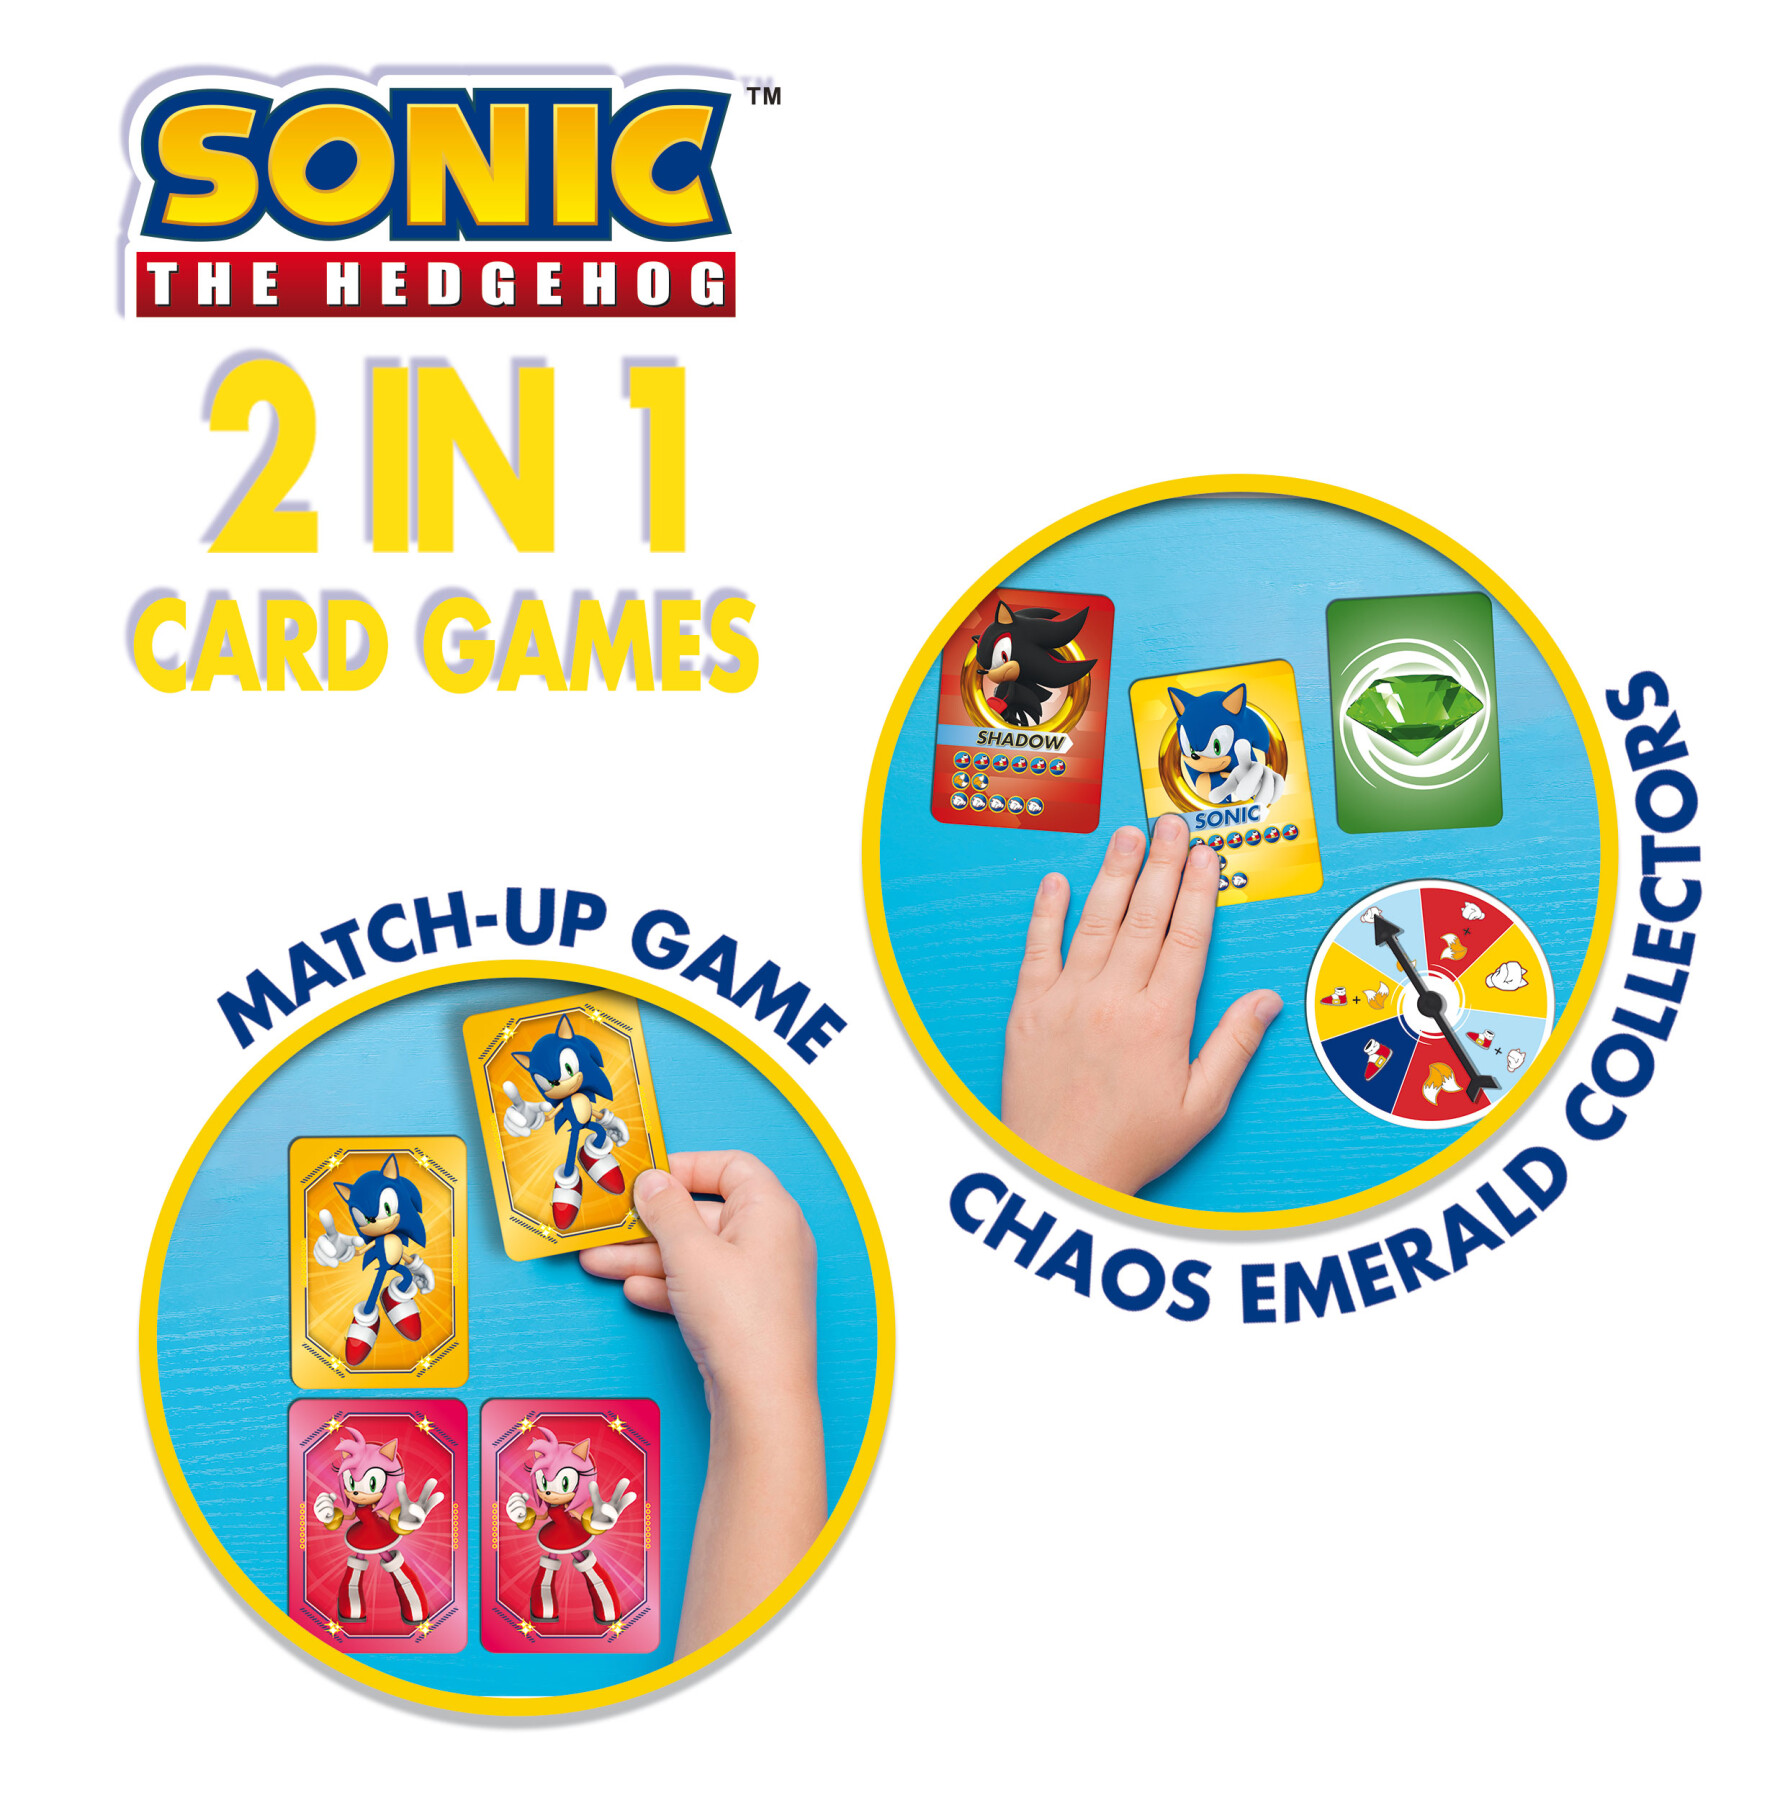 Sonic 2 in 1 card games in a backpack - LISCIANI, Sonic